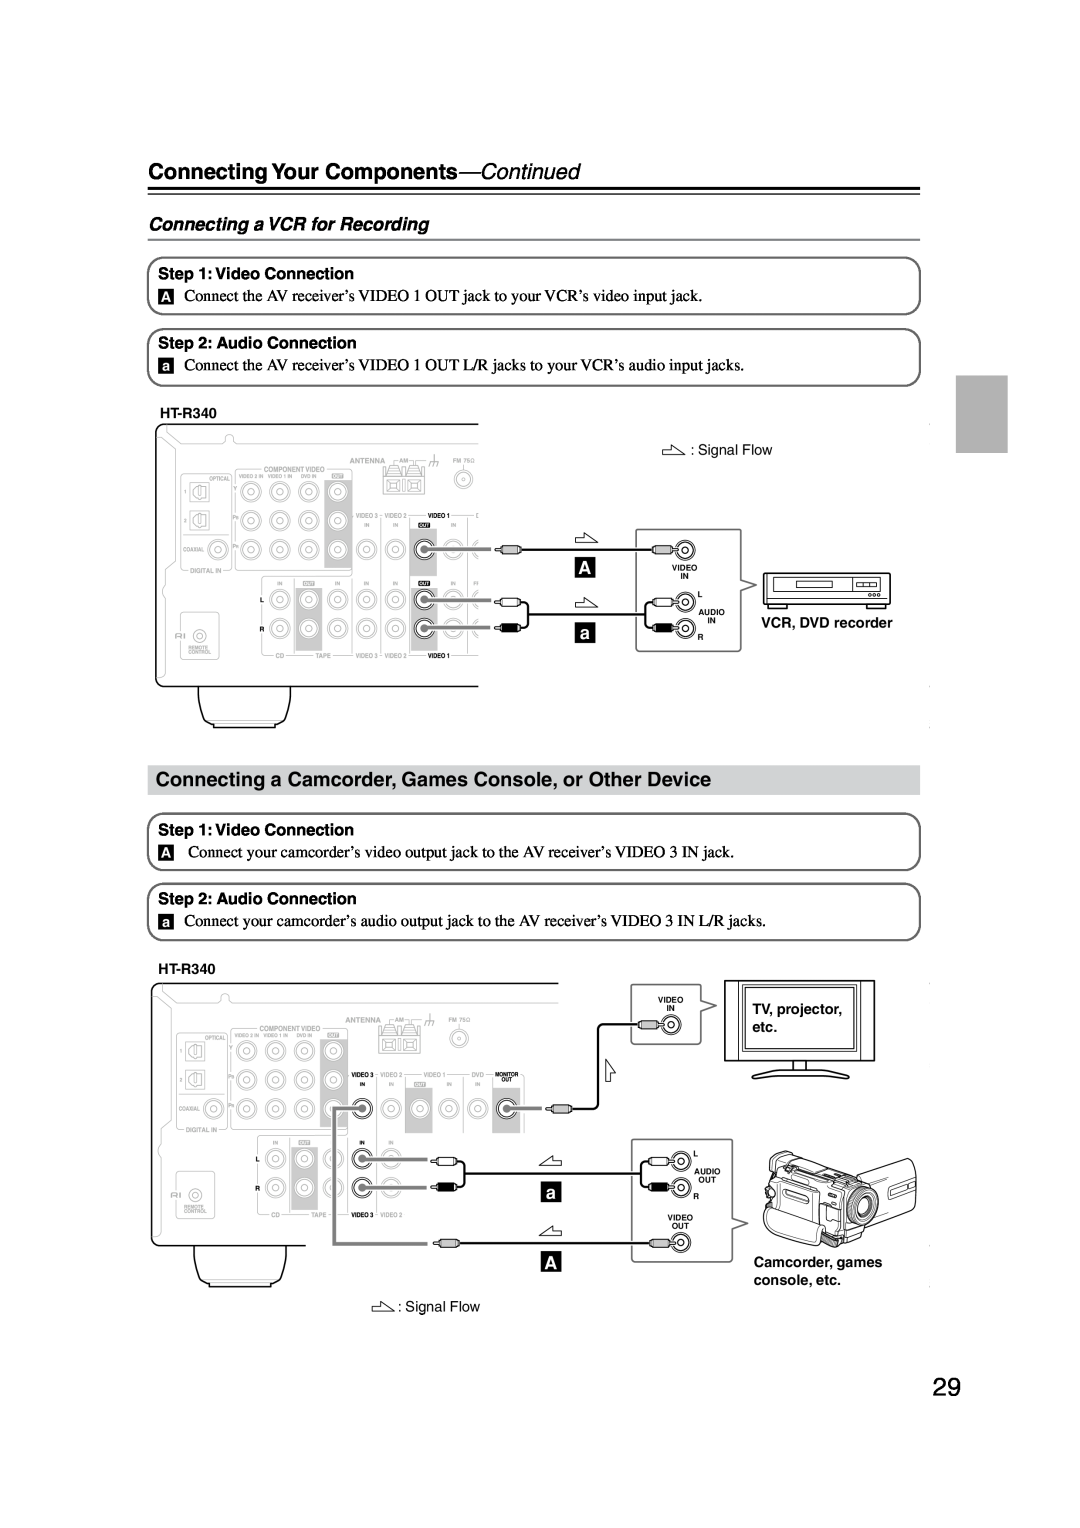 Onkyo HT-S590 instruction manual Connecting a VCR for Recording, Connecting Your Components-Continued 